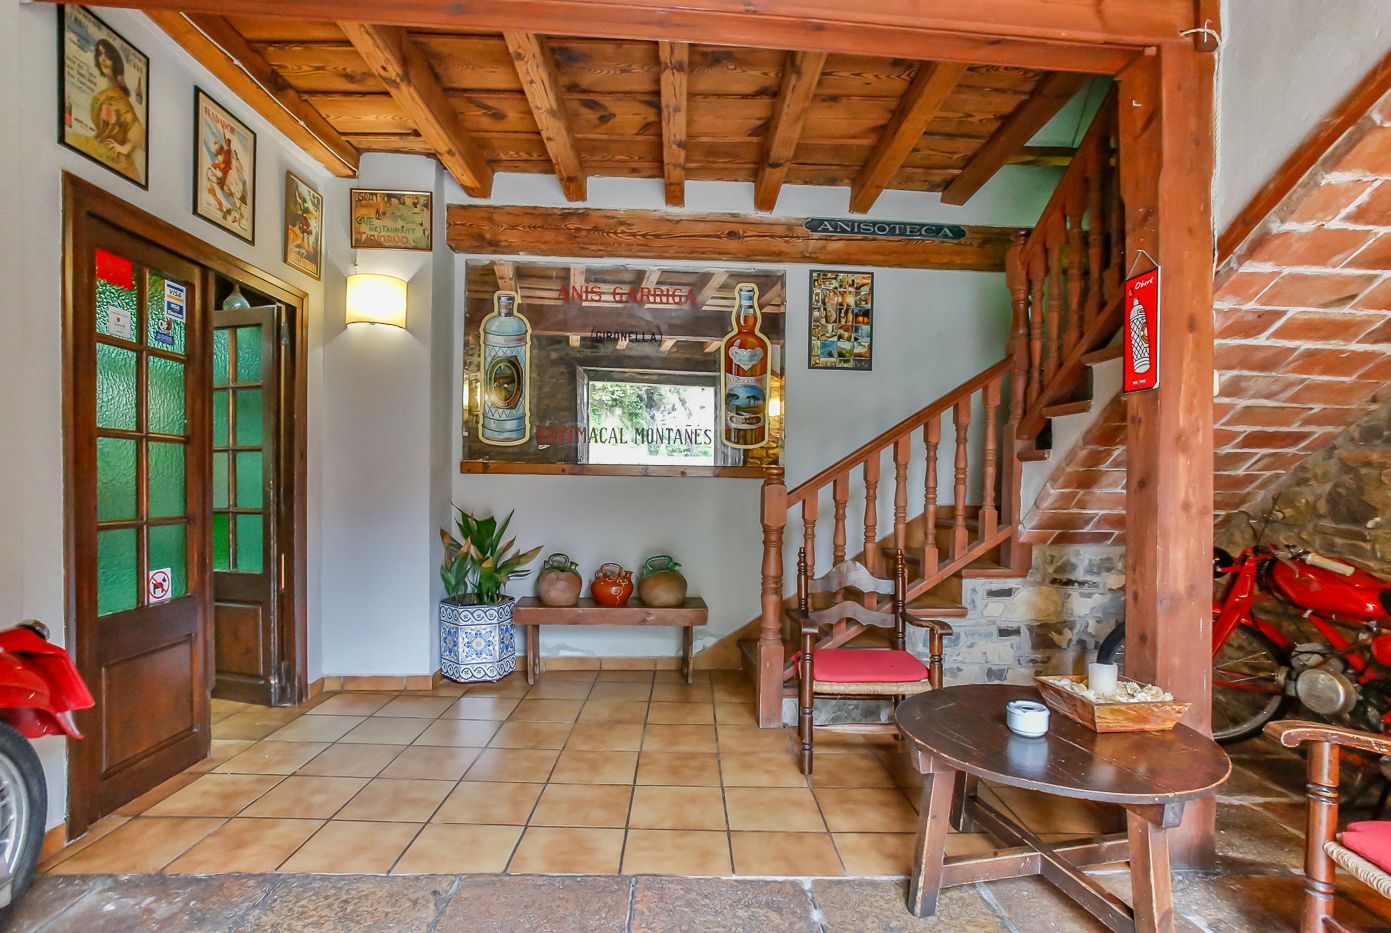 Colony house with restaurant for sale in the Pre-Pyrenees